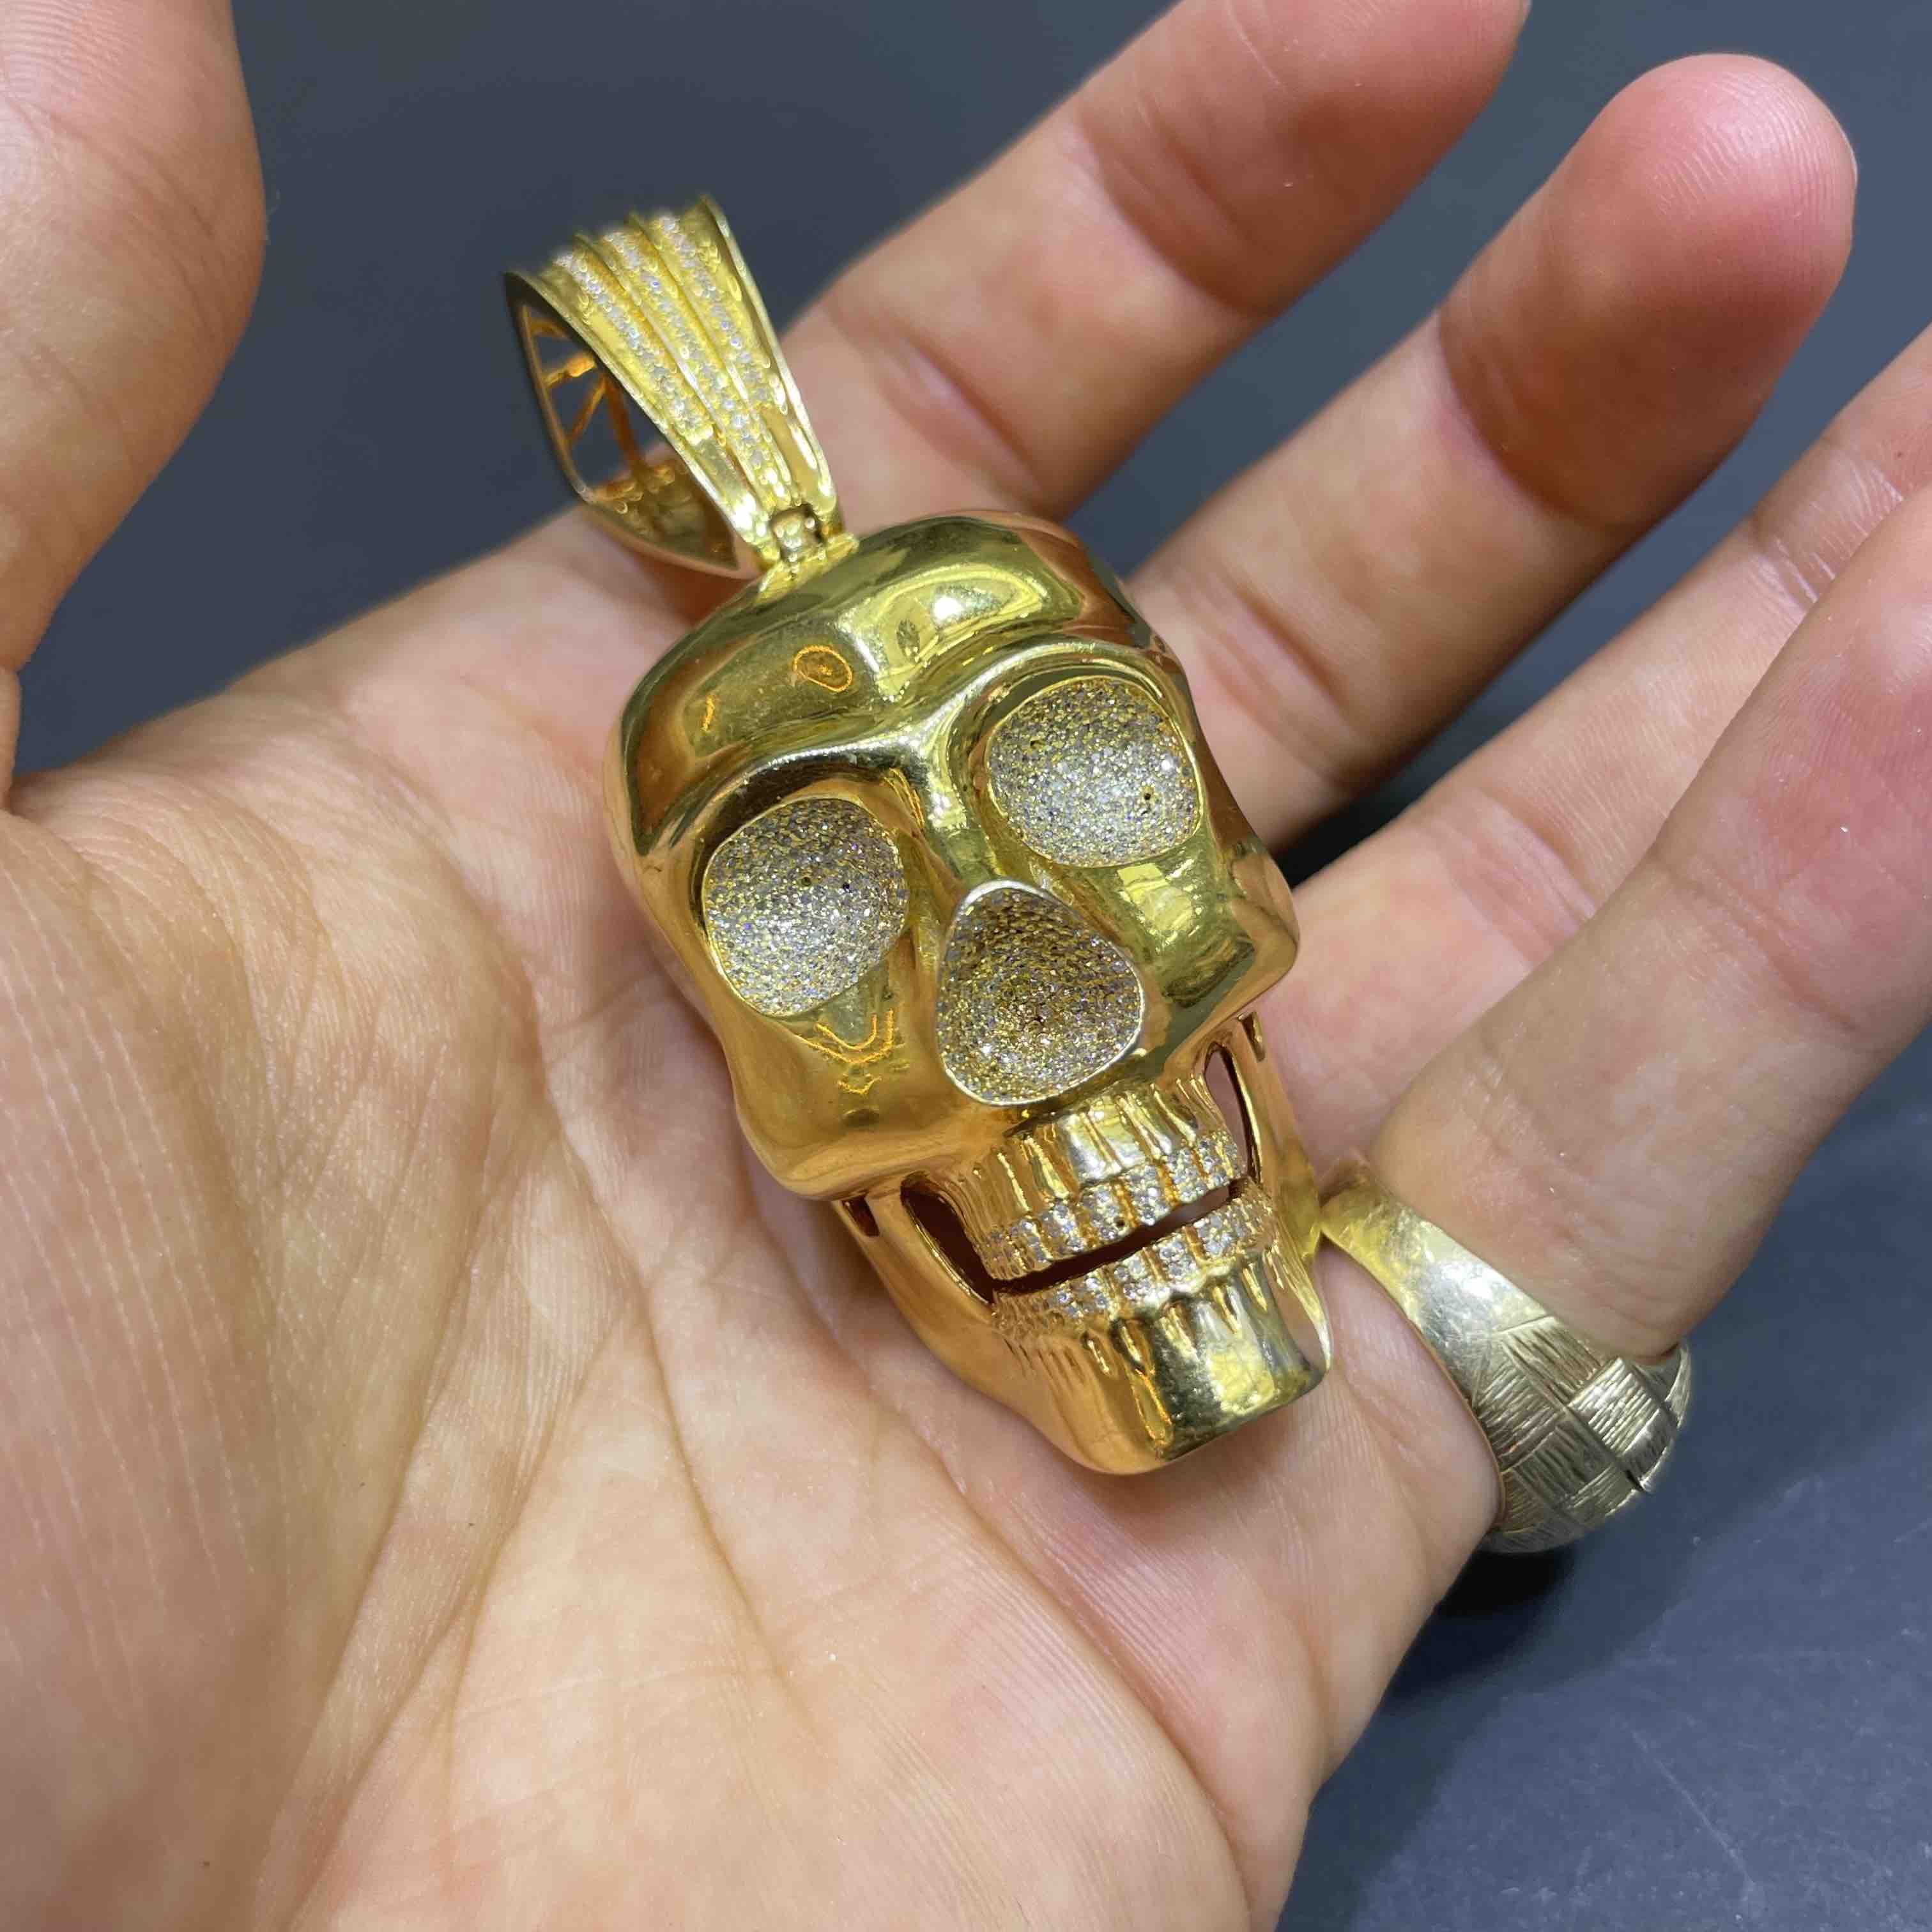 Gold Skull Pendant Iced Out